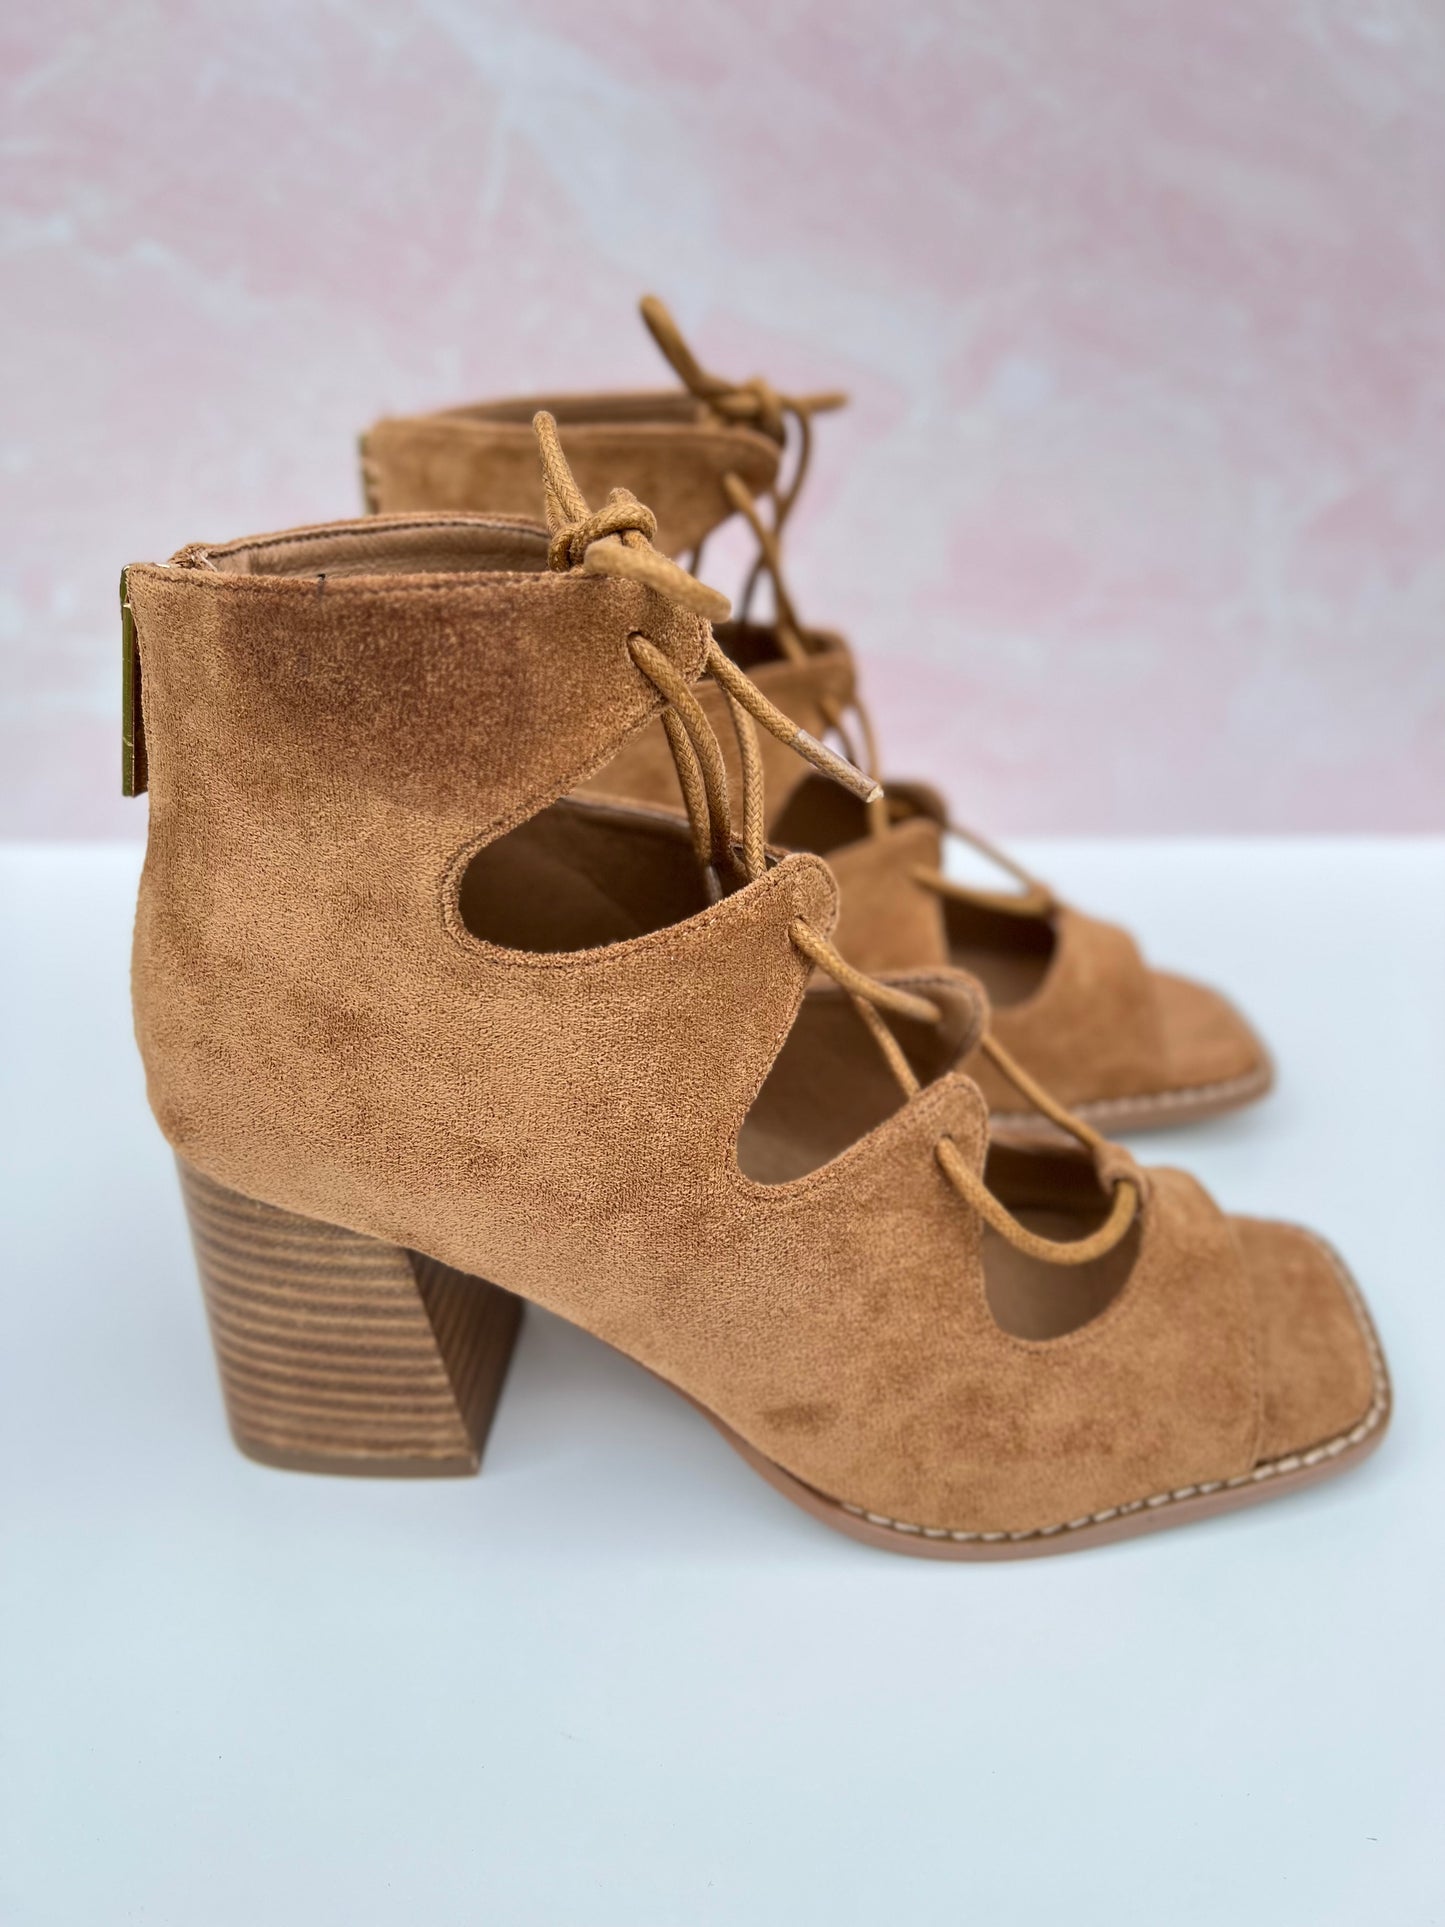 Corky's Wally Wedge - Camel Suede  - Final Sale